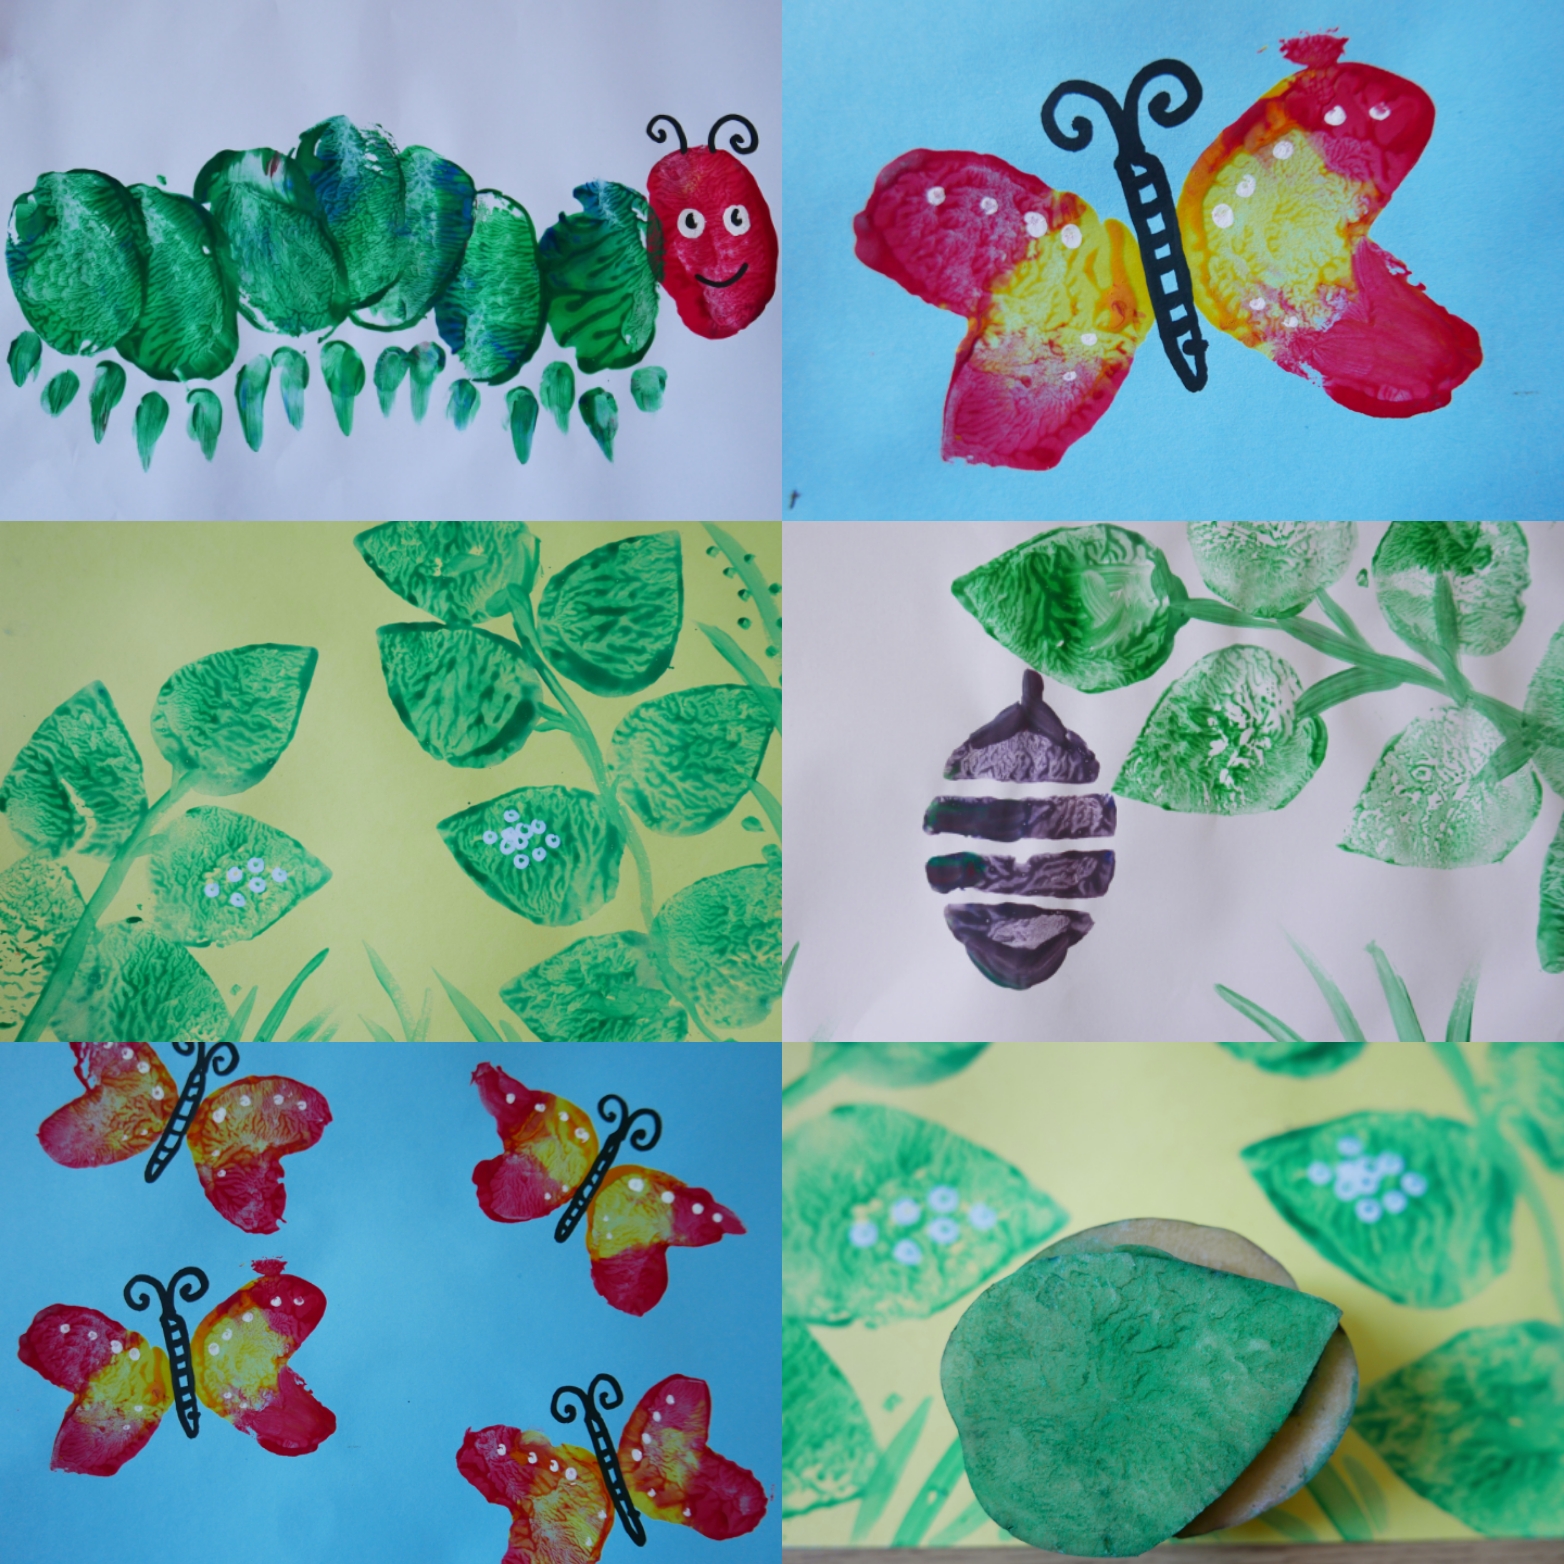 Butterfly Life Cycle In Action & Butterfly Drawing Activity Sheet | Glazer  Children's Museum